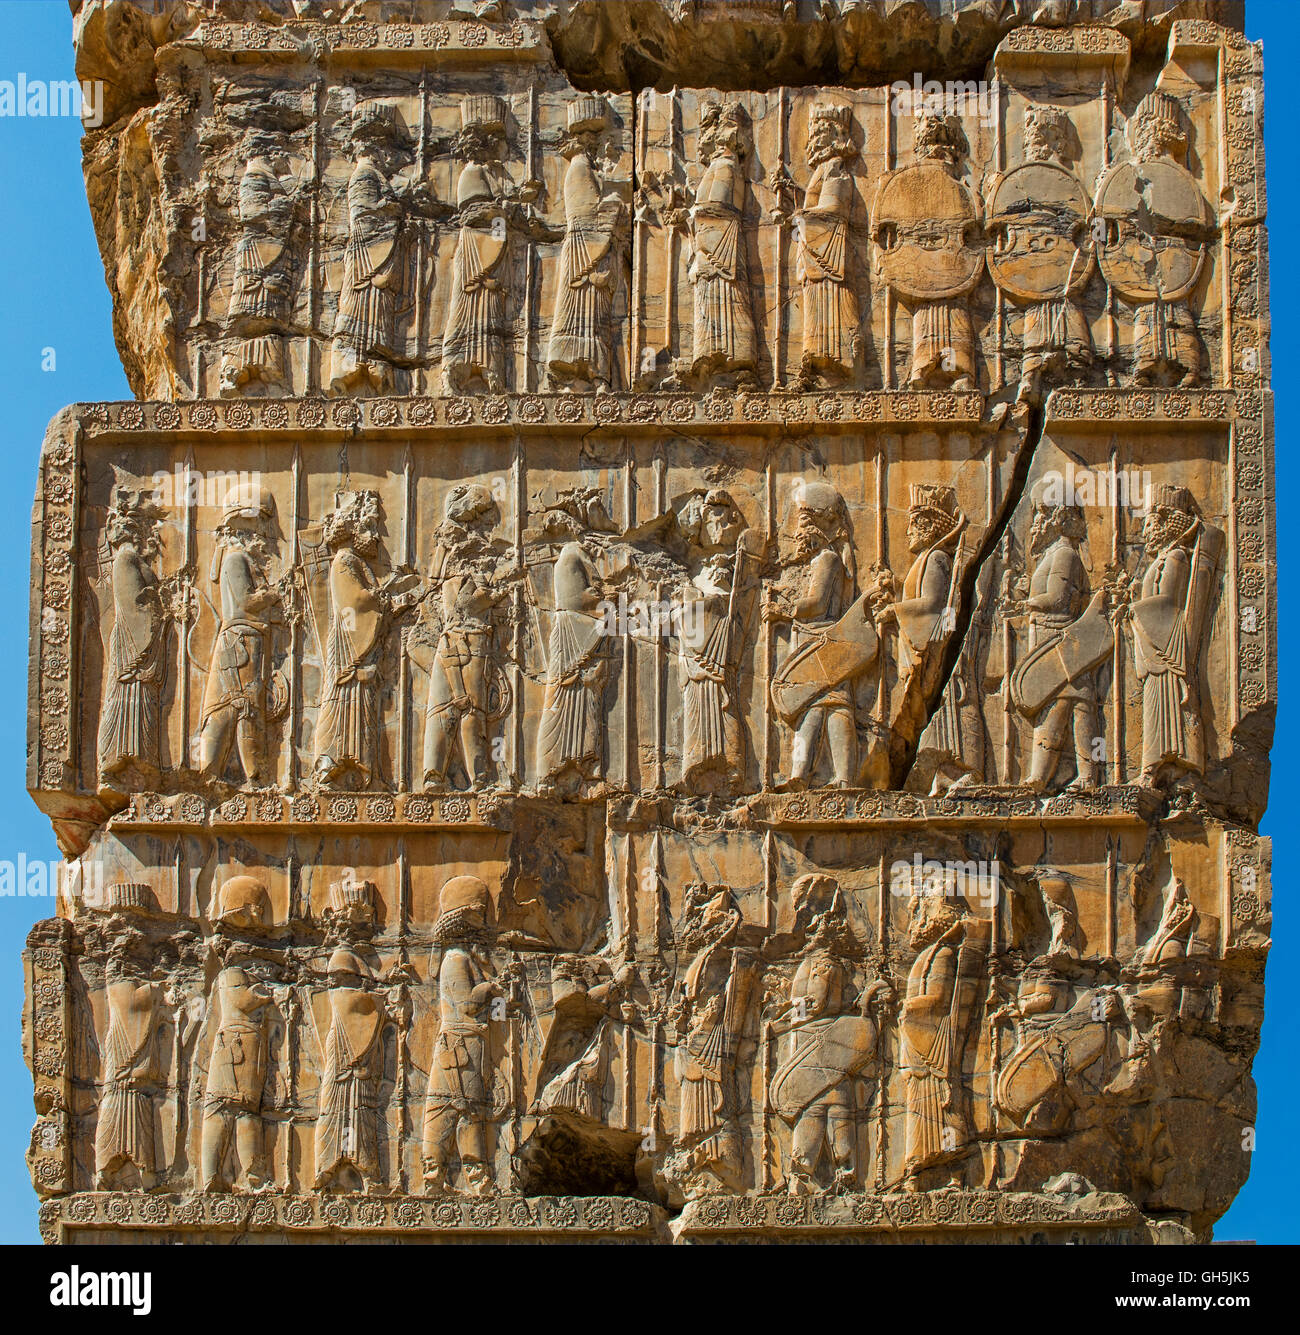 geography / travel, Iran, Persepolis, former capital of the Achaemenids, founded by king Darius I, 520 BC, throne room, relief with audience scene, Additional-Rights-Clearance-Info-Not-Available Stock Photo